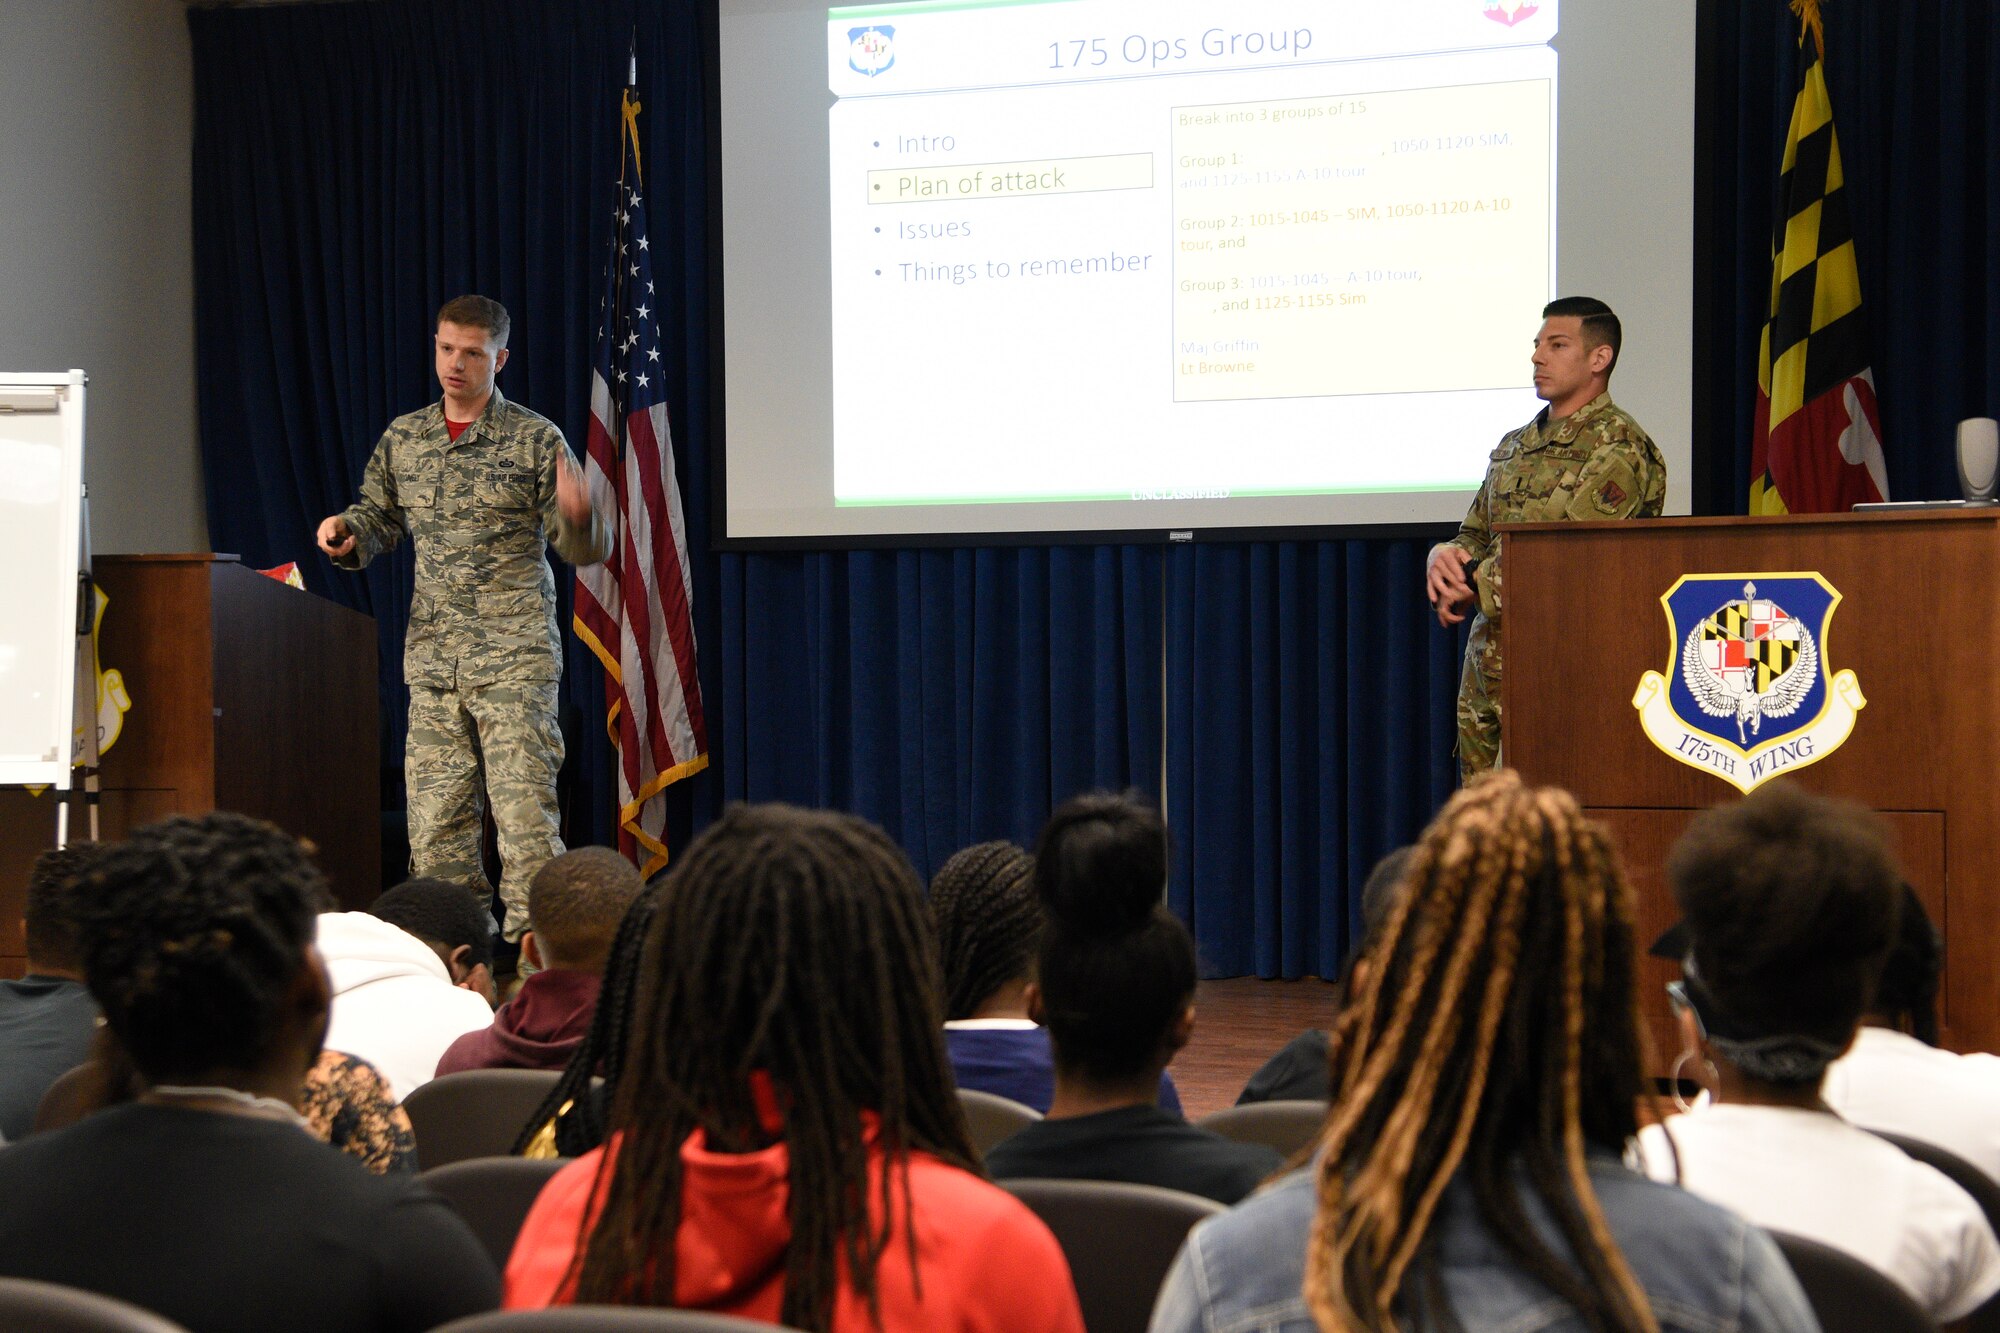 Members of the 175th Wing, Maryland Air National Guard, hosted a group students from the Baltimore City Department of Recreation and Parks Science, Technology, Engineering and Math program, July 3, 2019, at Martin State Airport, Middle River, Md. The program is designed to build on the students’ interest and knowledge in the STEM arena as they prepare for college or careers after high school. (U.S. Air National Guard photo by Staff Sgt. Enjoli Saunders)